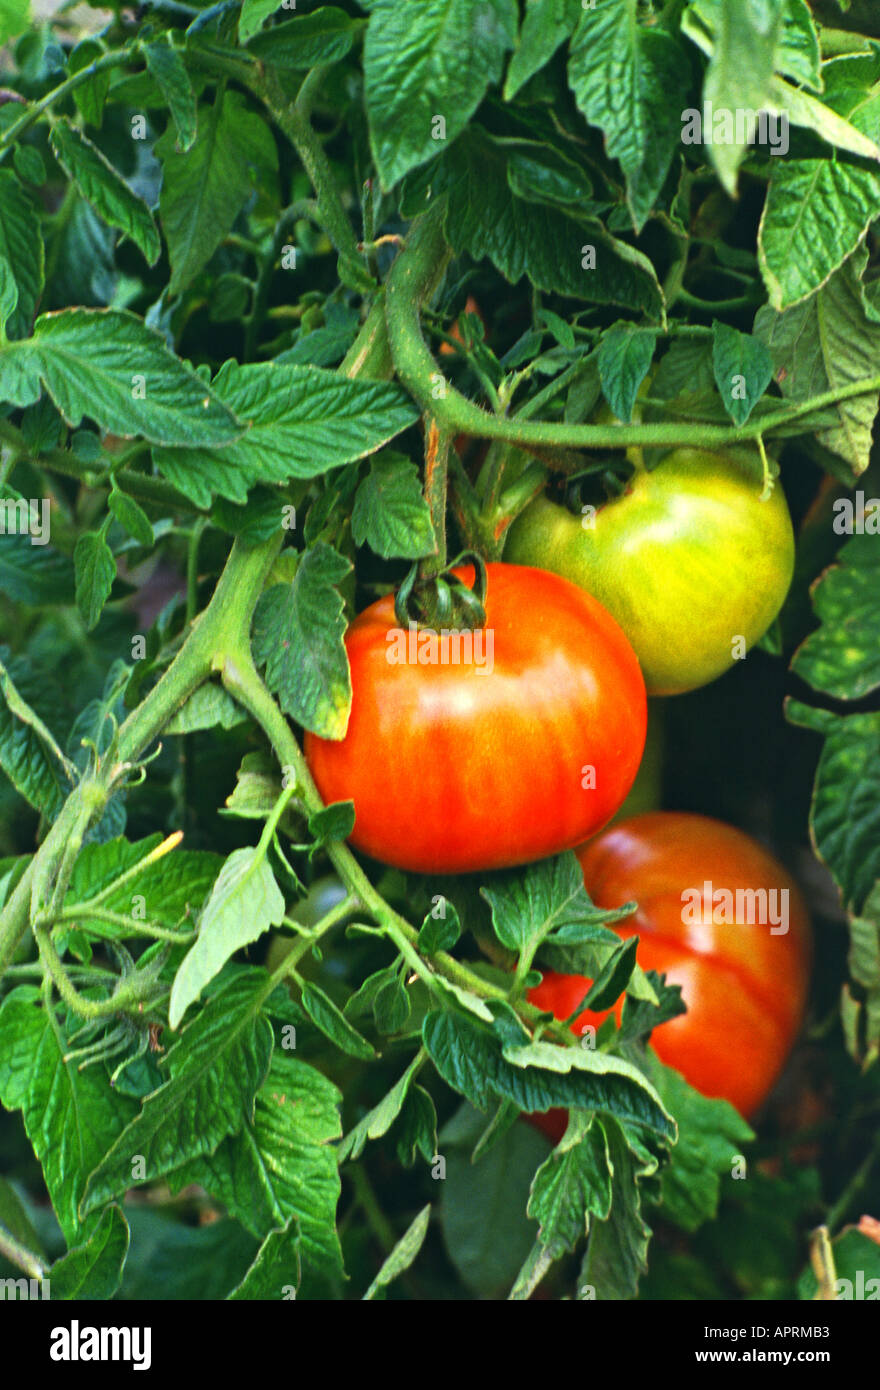 Ripening ox heart tomatoes on the vine Stock Photo